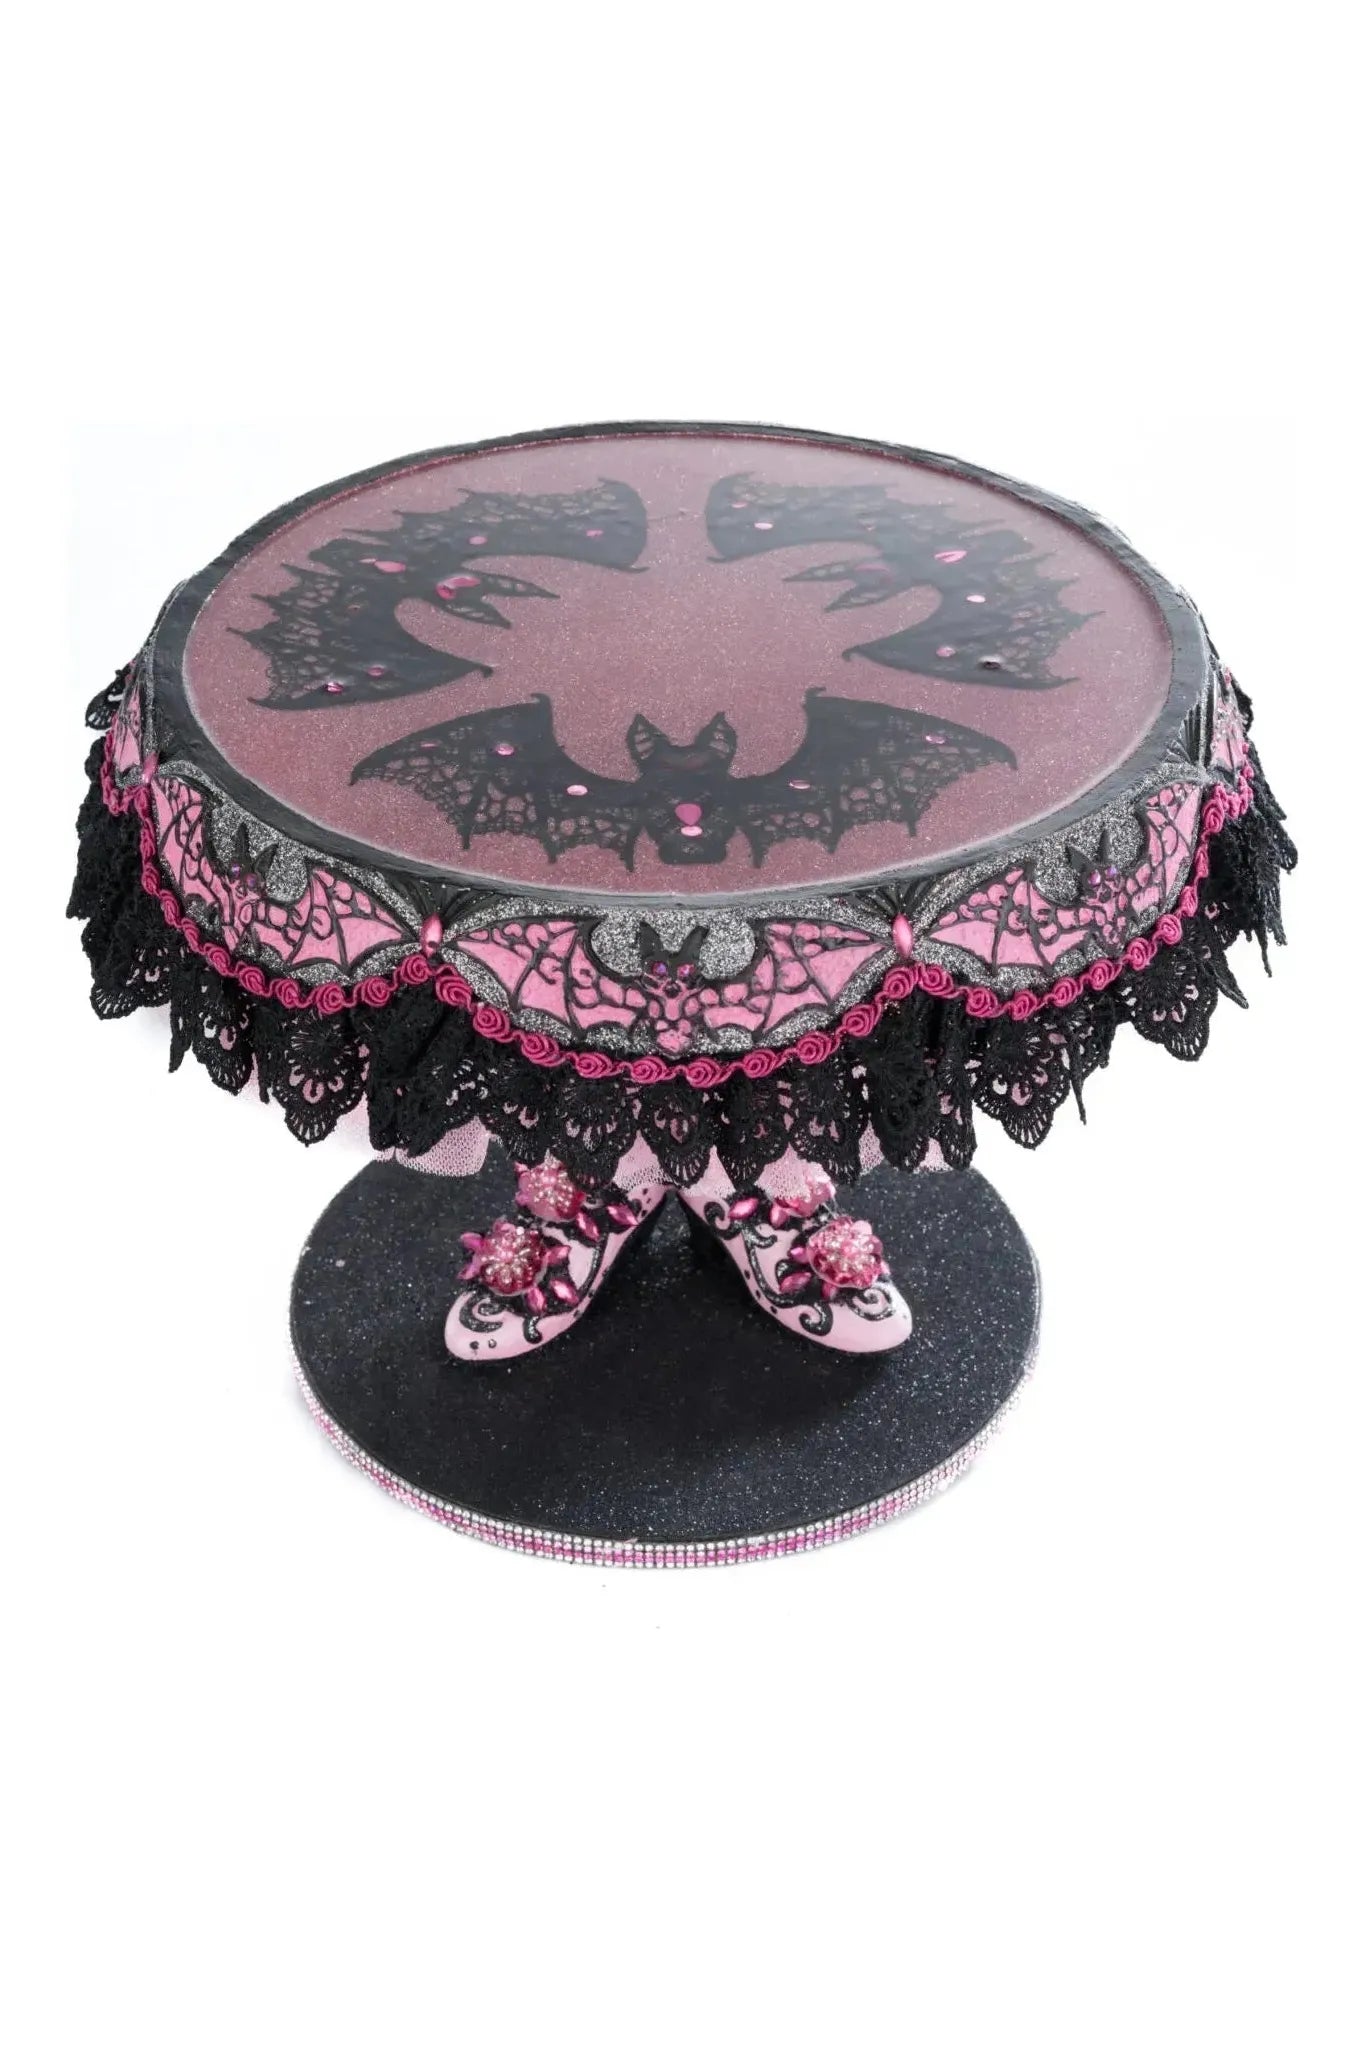 Pink Panic Possession Witch Boots Cake Plate - Michelle's aDOORable Creations - Halloween Decor